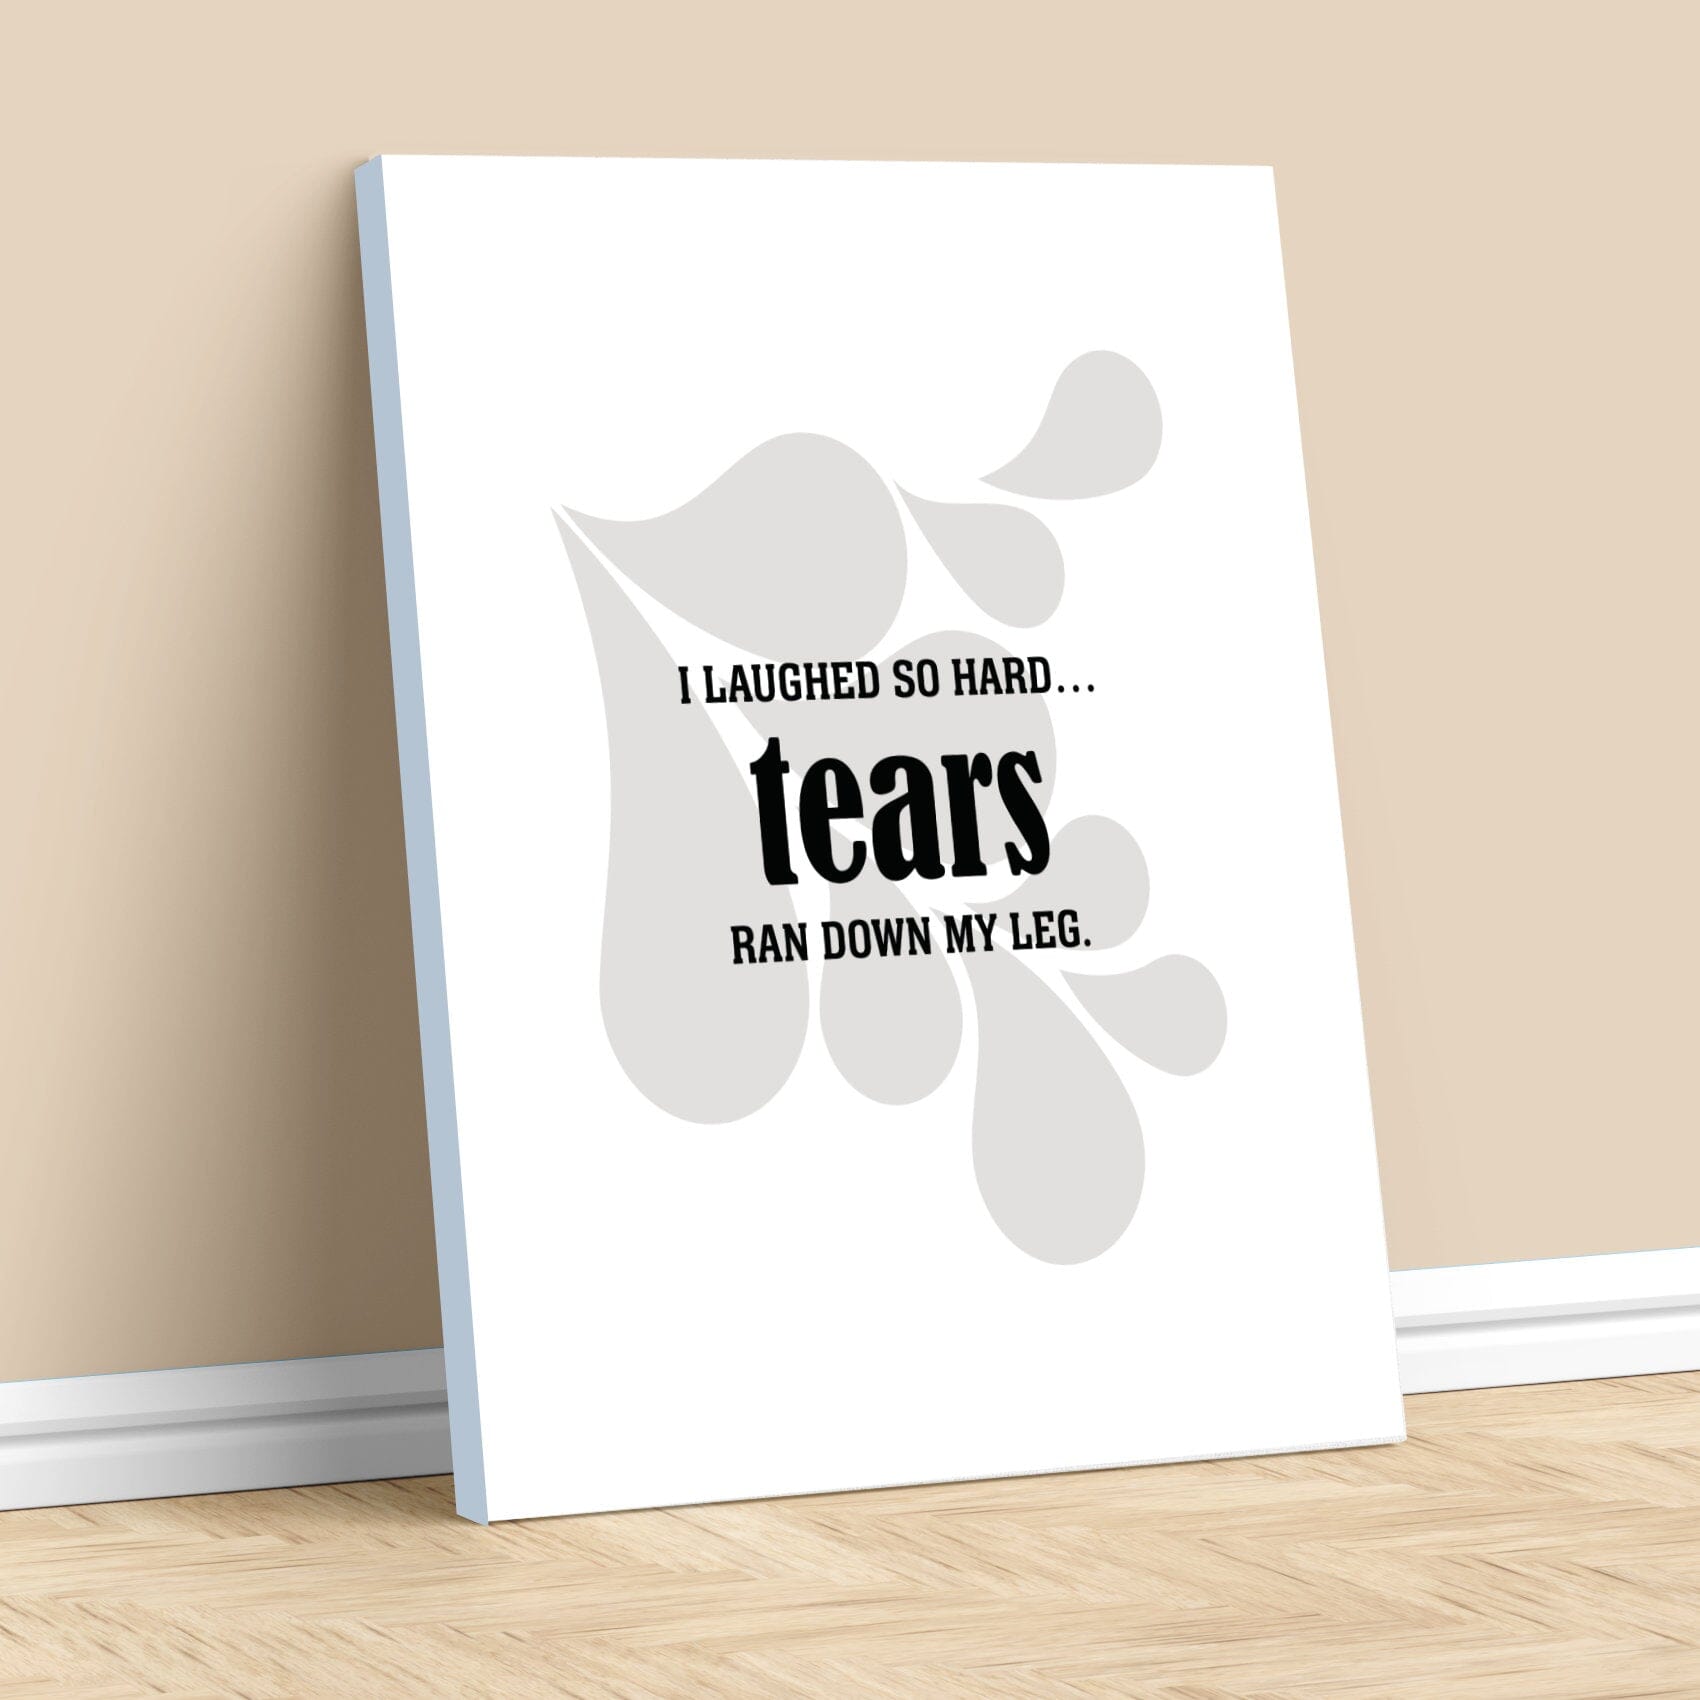 Wise and Witty Art - I Laughed So Hard Tears Ran Down My Leg Wise and Wiseass Quotes Song Lyrics Art 11x14 Canvas Wrap 